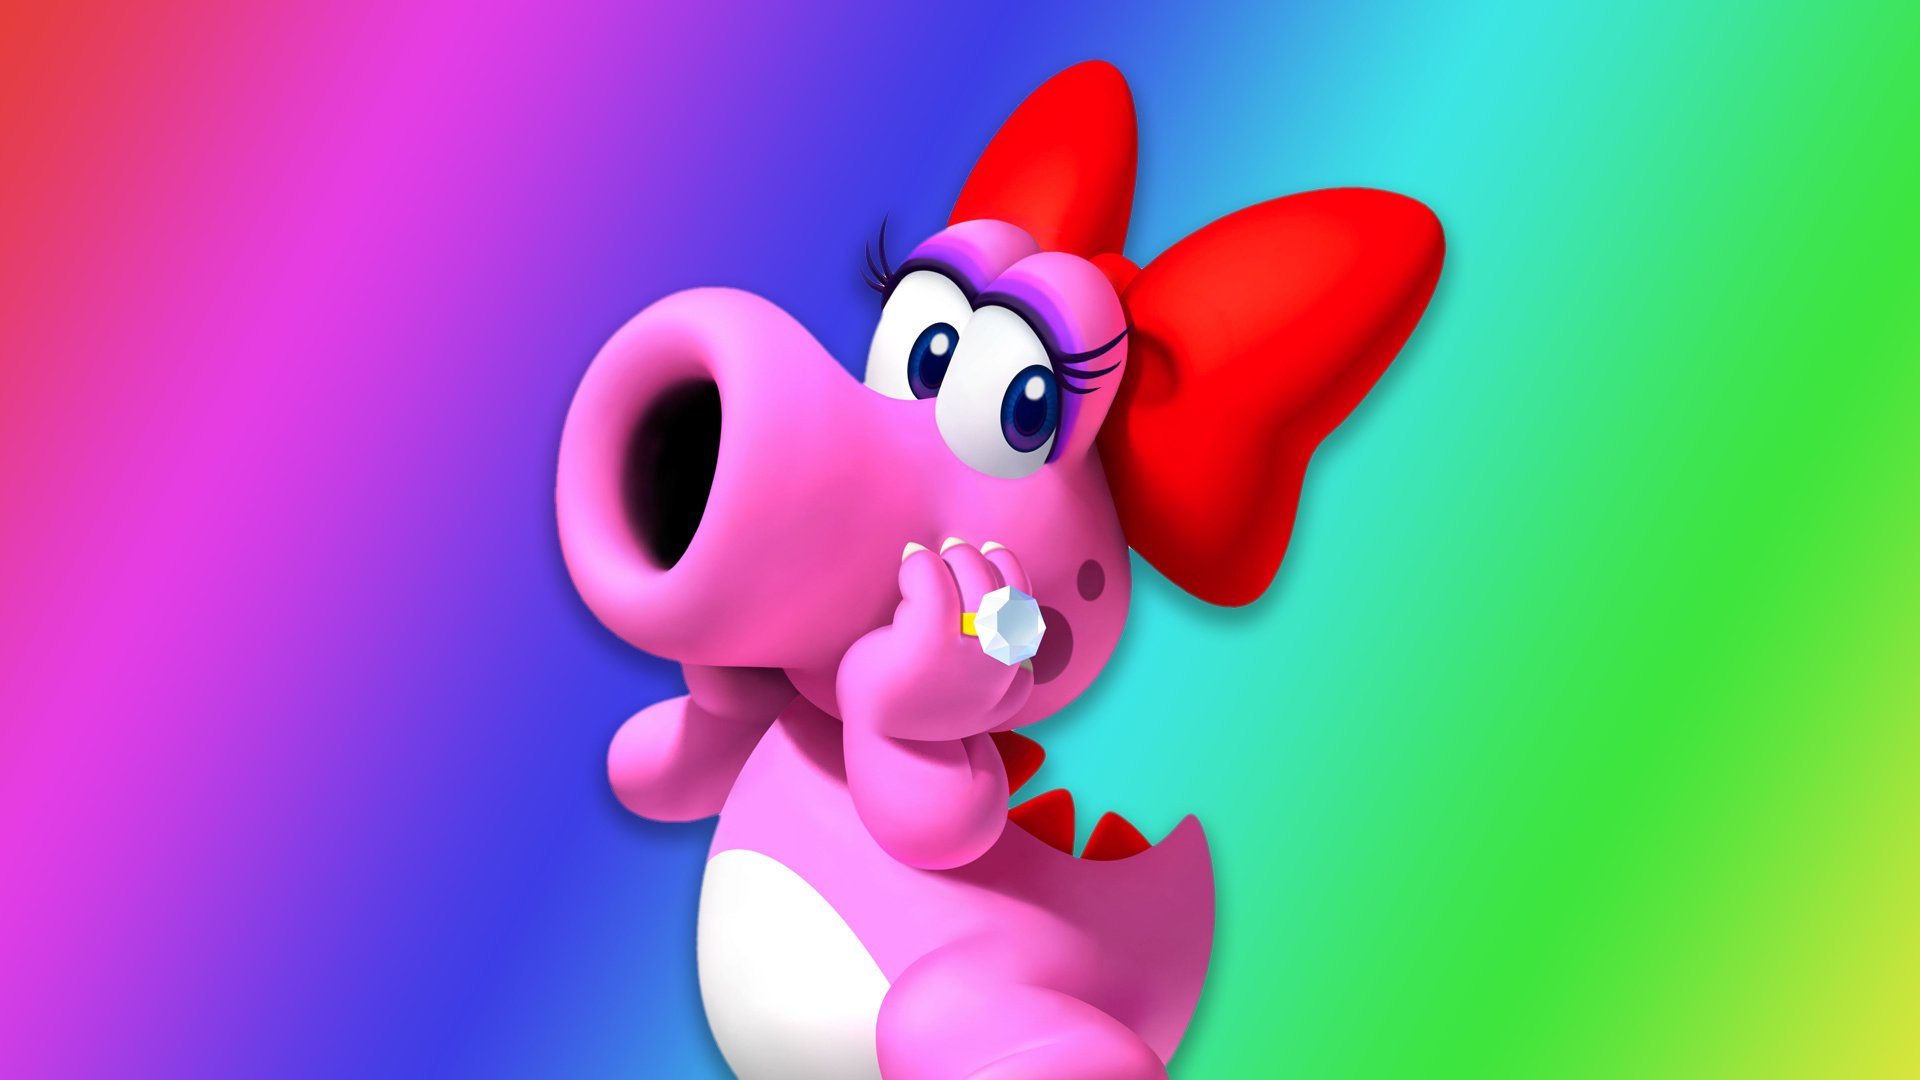 characters with foot fetishes - Birdo